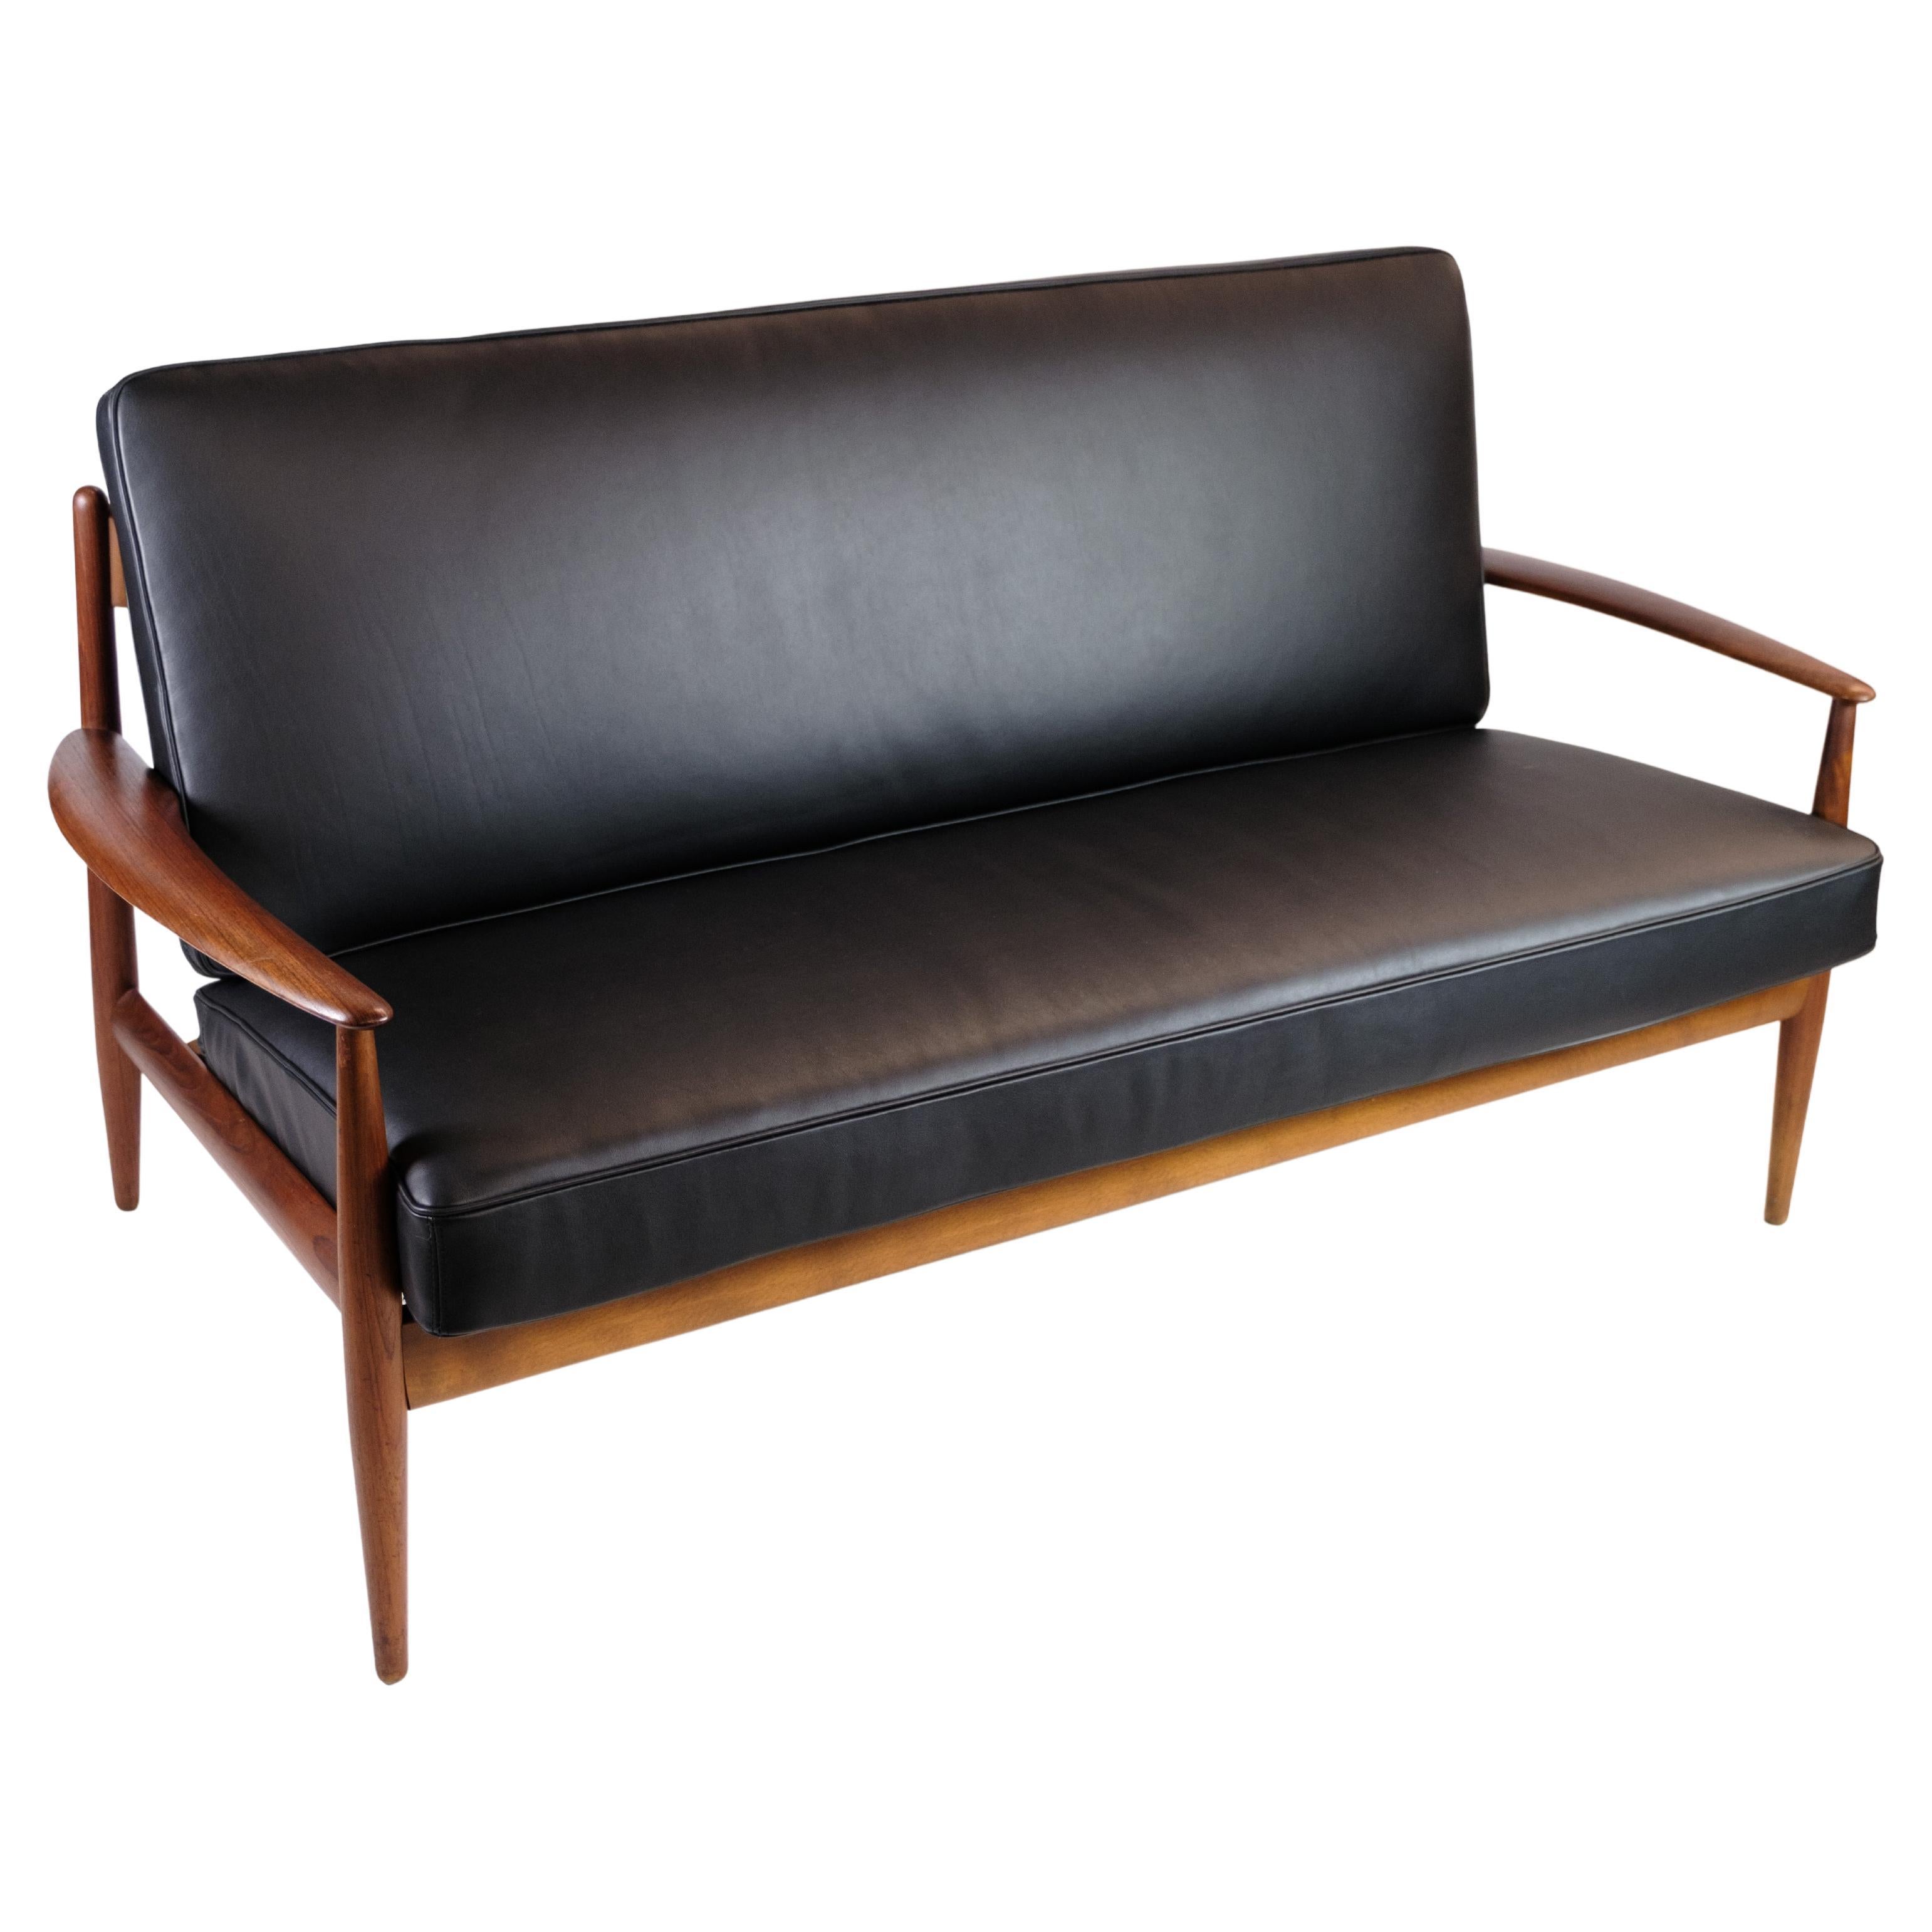 2 Seater Sofa Model 118 Made With a Teak Frame By Grete Jalk From 1960s